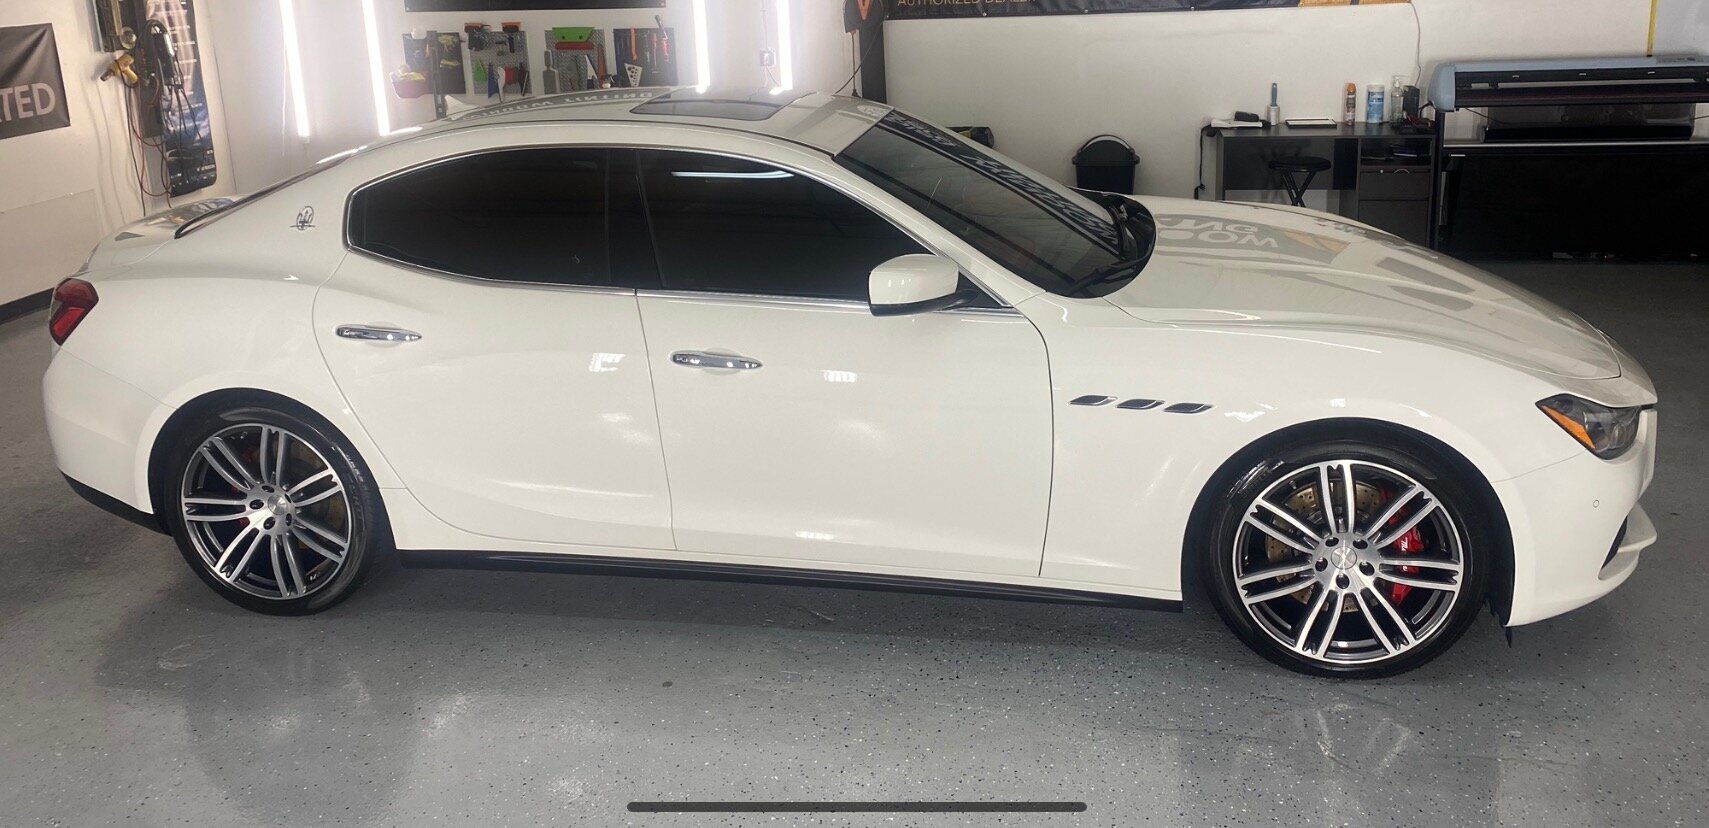 https://static.showit.co/2400/xeZG4b7eQemX3GmNj-JHgA/shared/a-nice-touch-auto-detailing-white-car-scratch-scuff-paint-transfer-removal.jpg